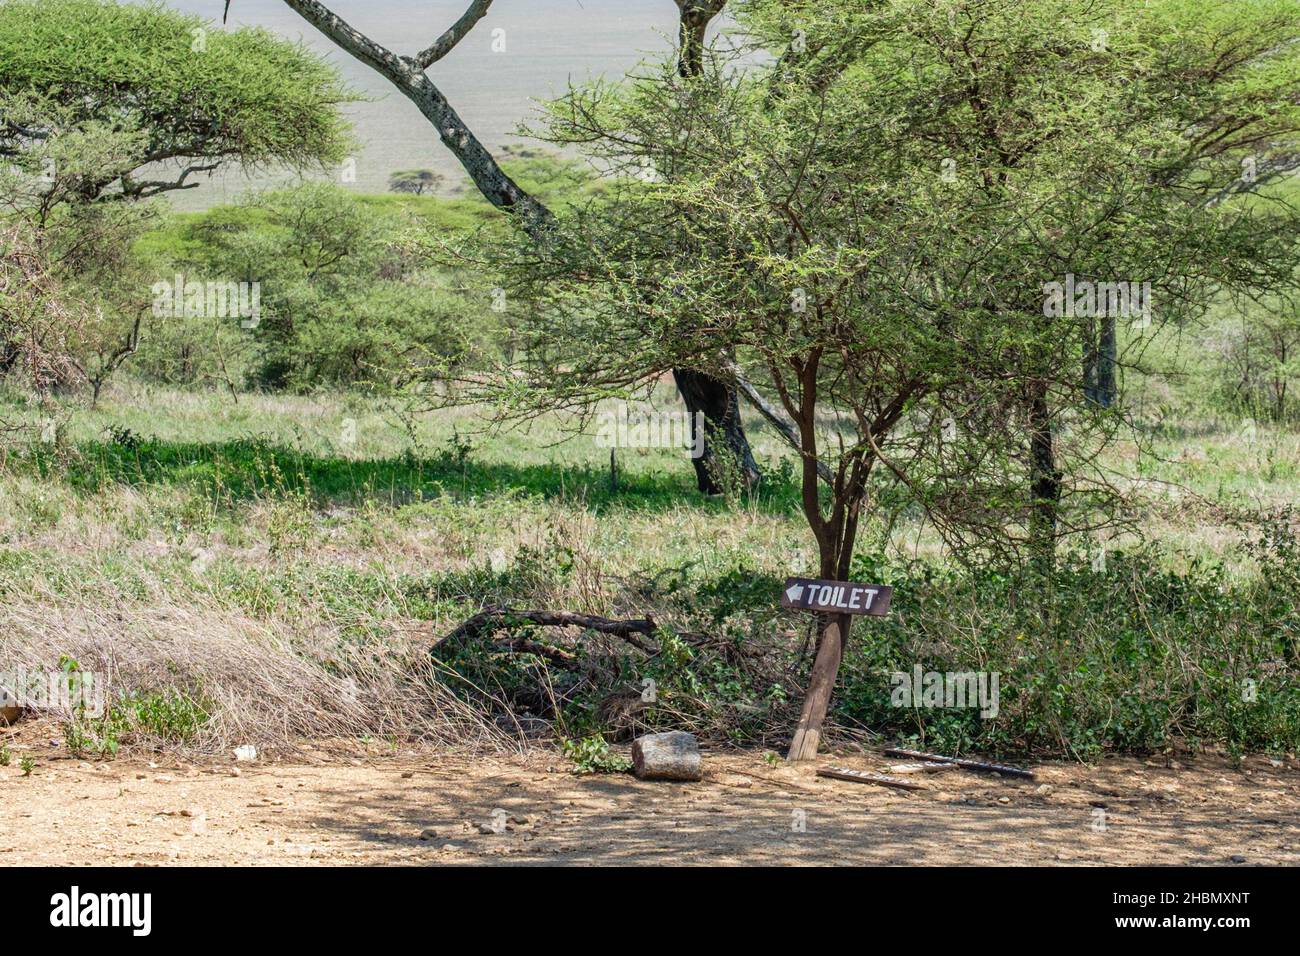 Unlikely placed toilet sign in remote part of the Serengeti, Tanzania Stock Photo